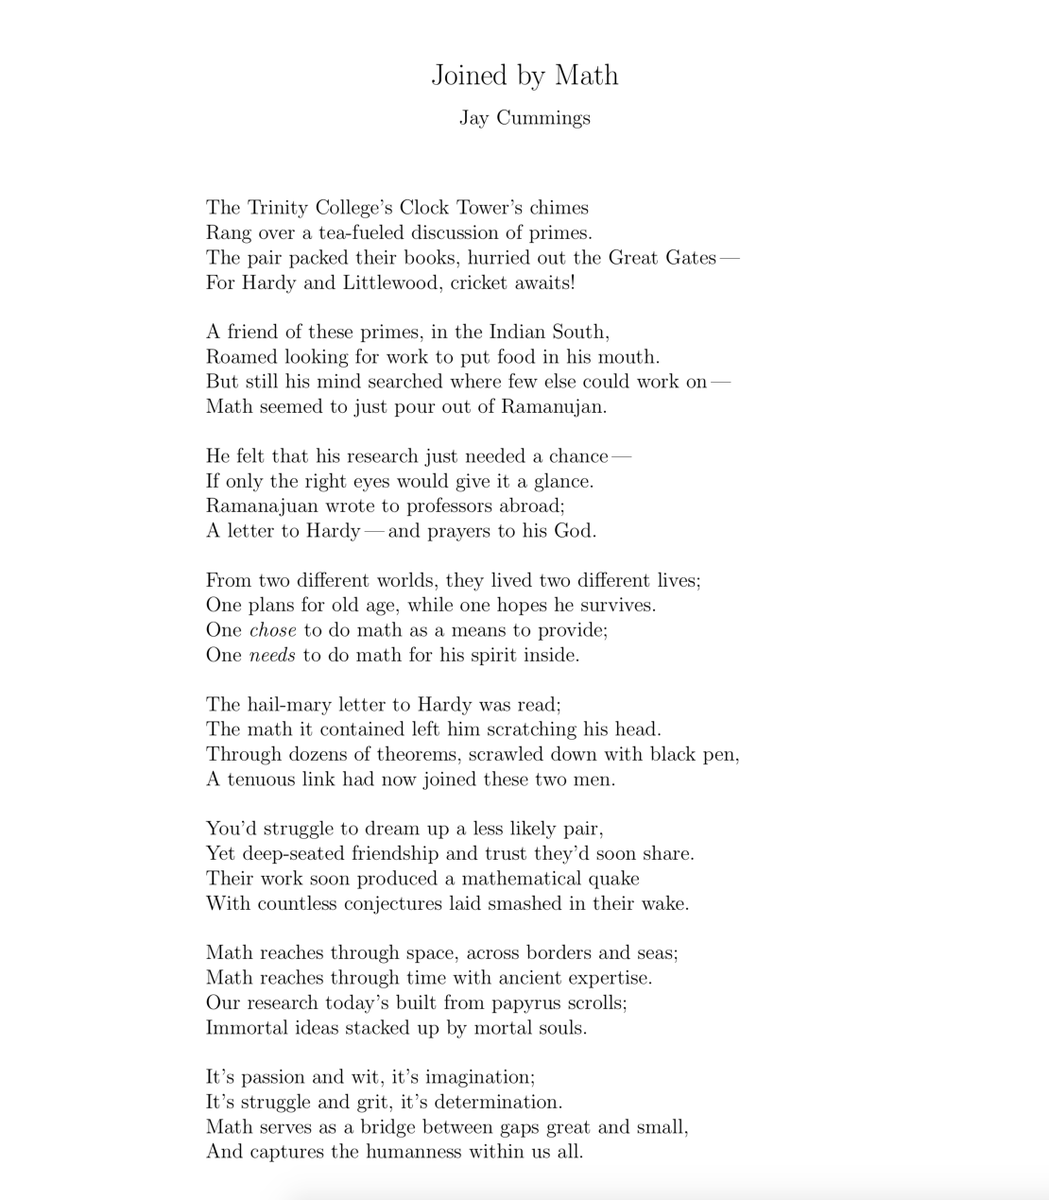 Ramanujan passed away 100 years ago today. With little means or math instruction, he discovered results which Hardy said "must be true, because if they were not true no one would have the imagination to invent them." I wrote a poem about how math brought these two together. Enjoy